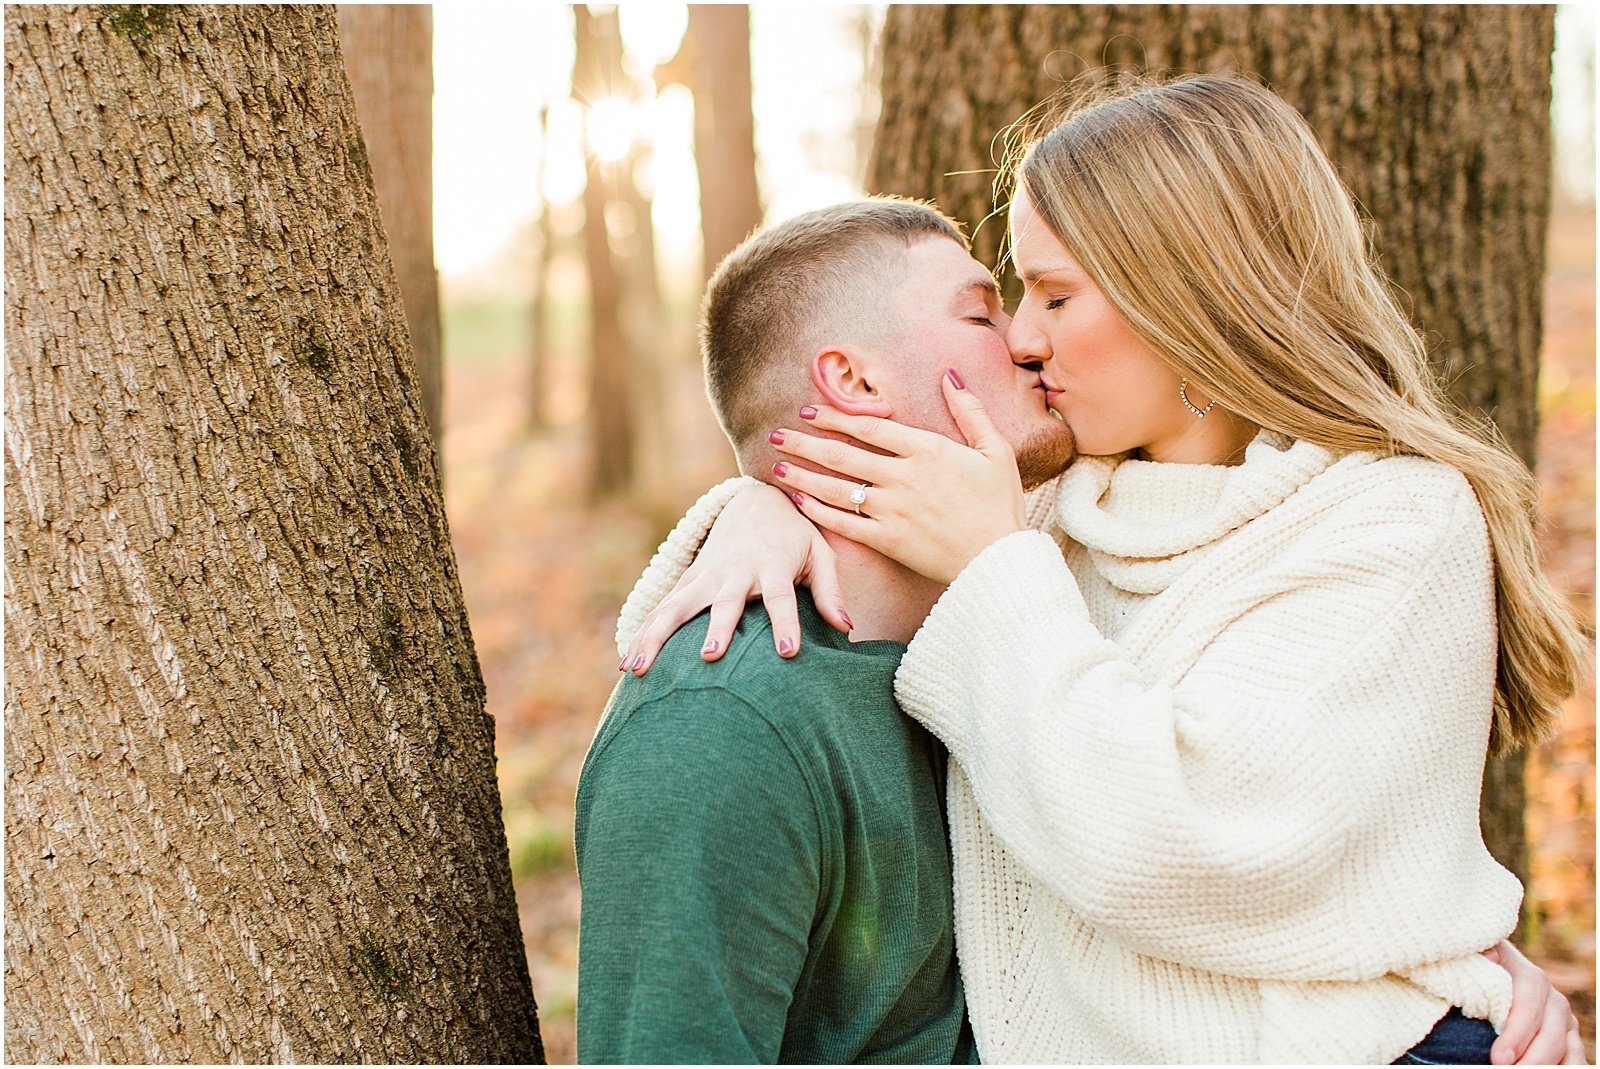 A Fall Southern Indiana Engagement Seesion | Cody and Hannah | Bret and Brandie Photography 031.jpg